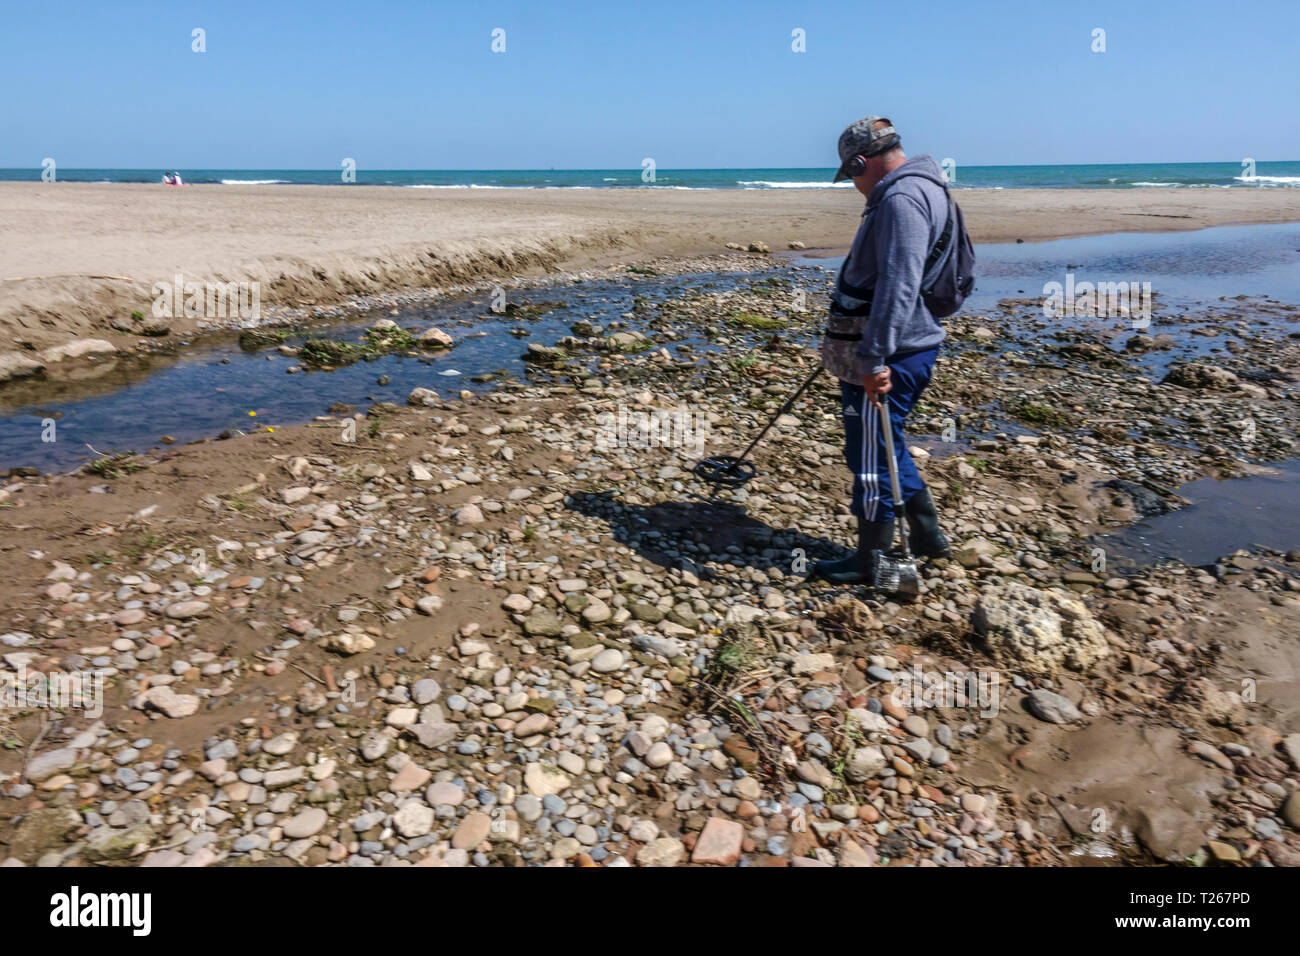 Man with a metal detector tiny objects in a small river bed trough the sea, Valencia Spain Stock Photo